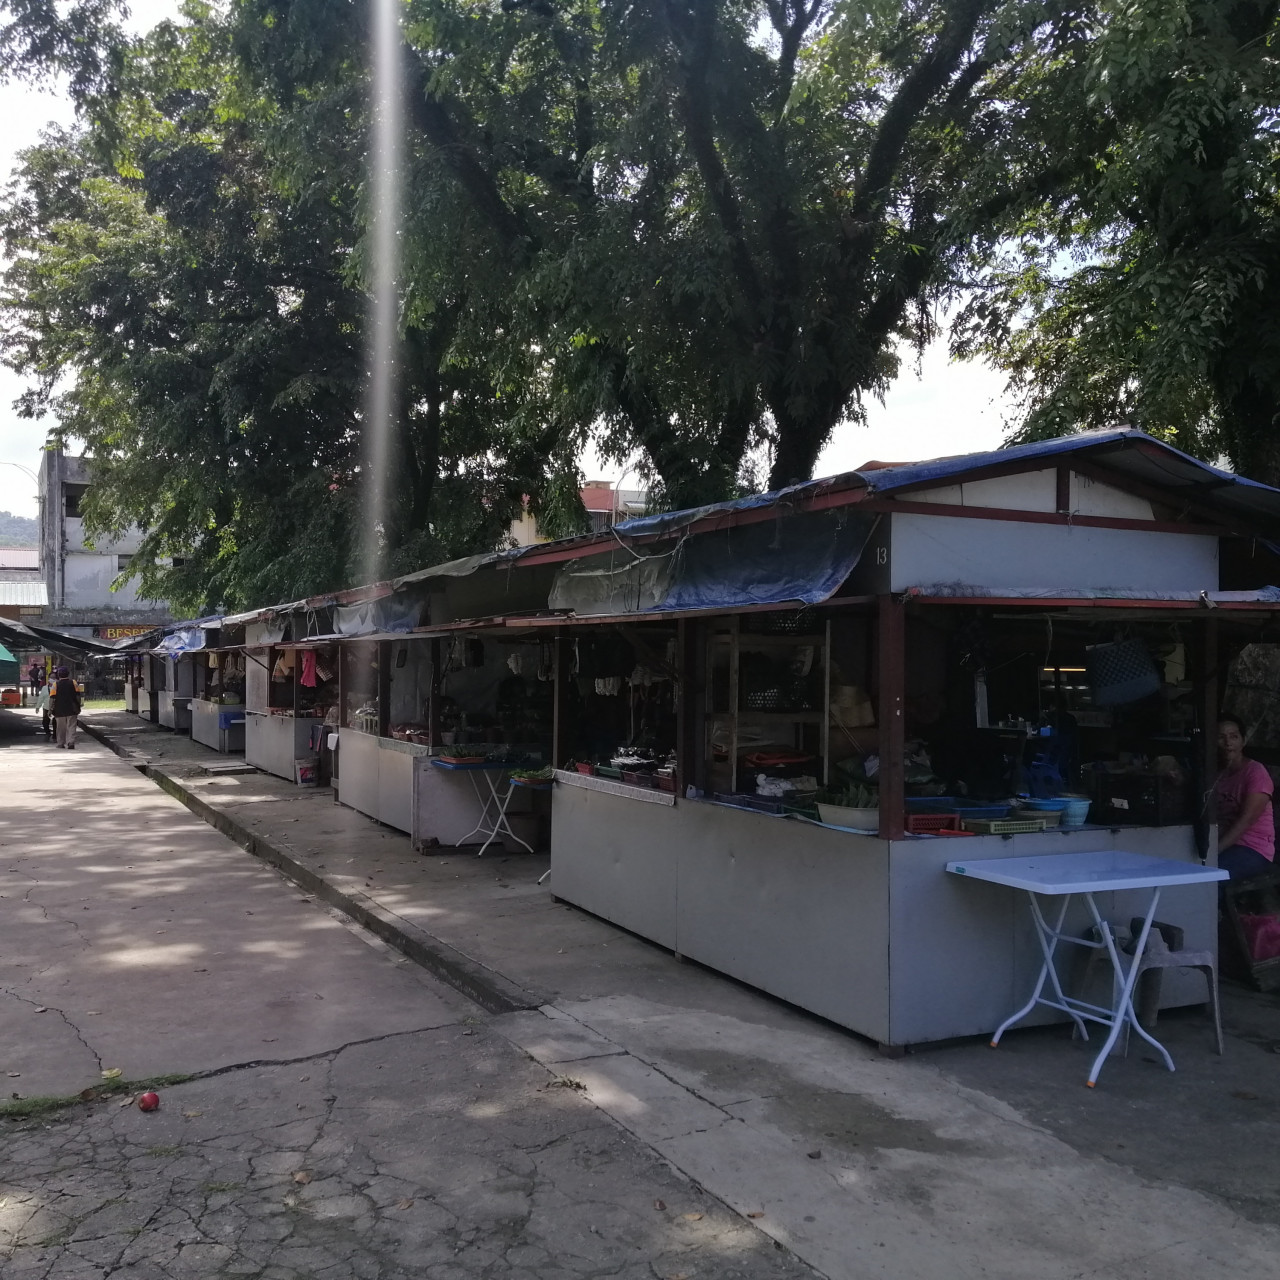 A row of stalls operated by locals who are from the Rungus tribe. – The Vibes pic, September 24, 2020